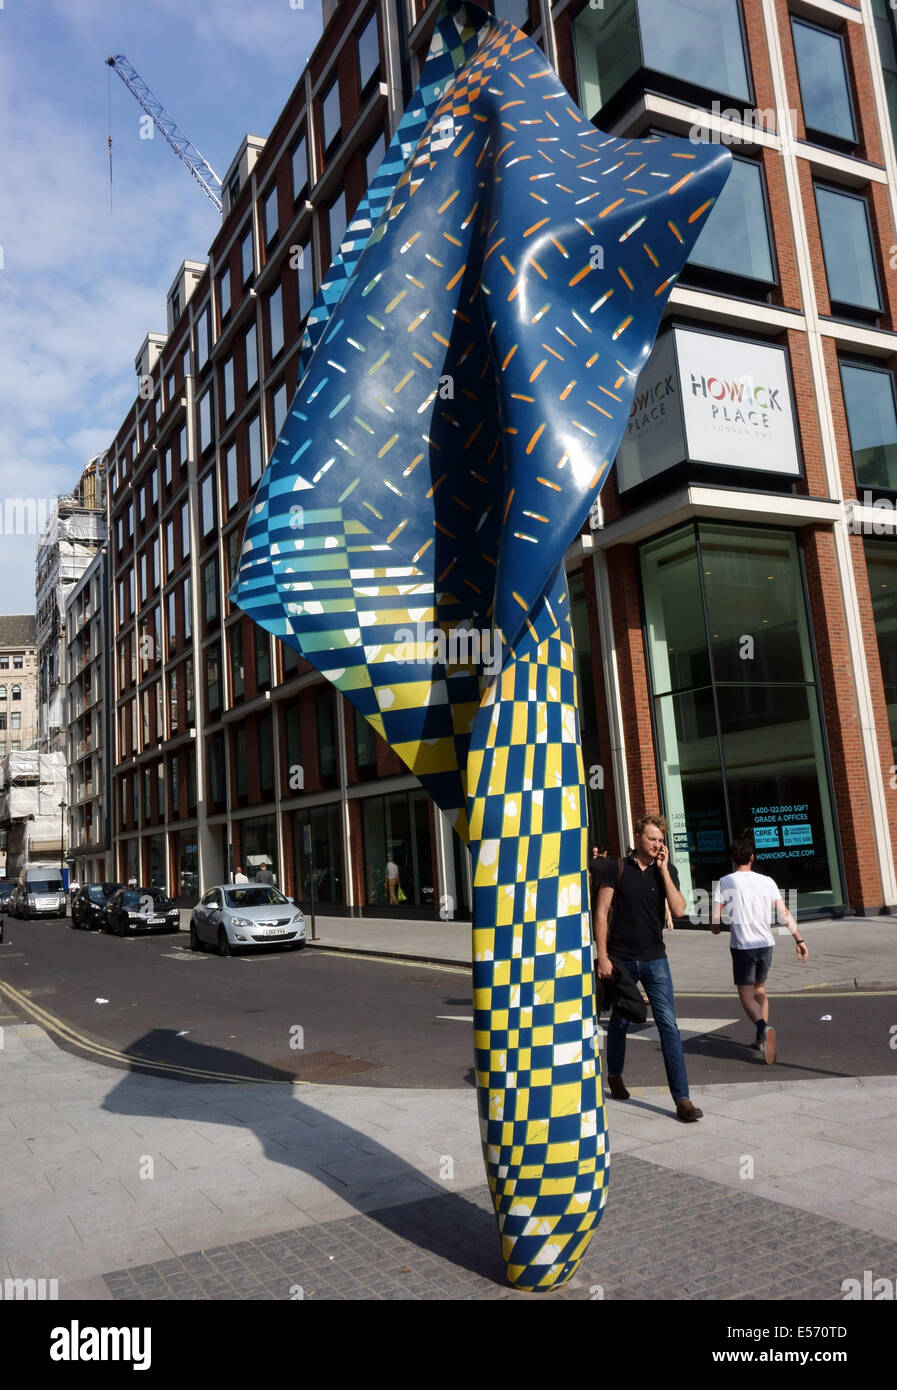 Wind Sculpture by Yinka Shonibare in Howick Place, Victoria, London Stock Photo